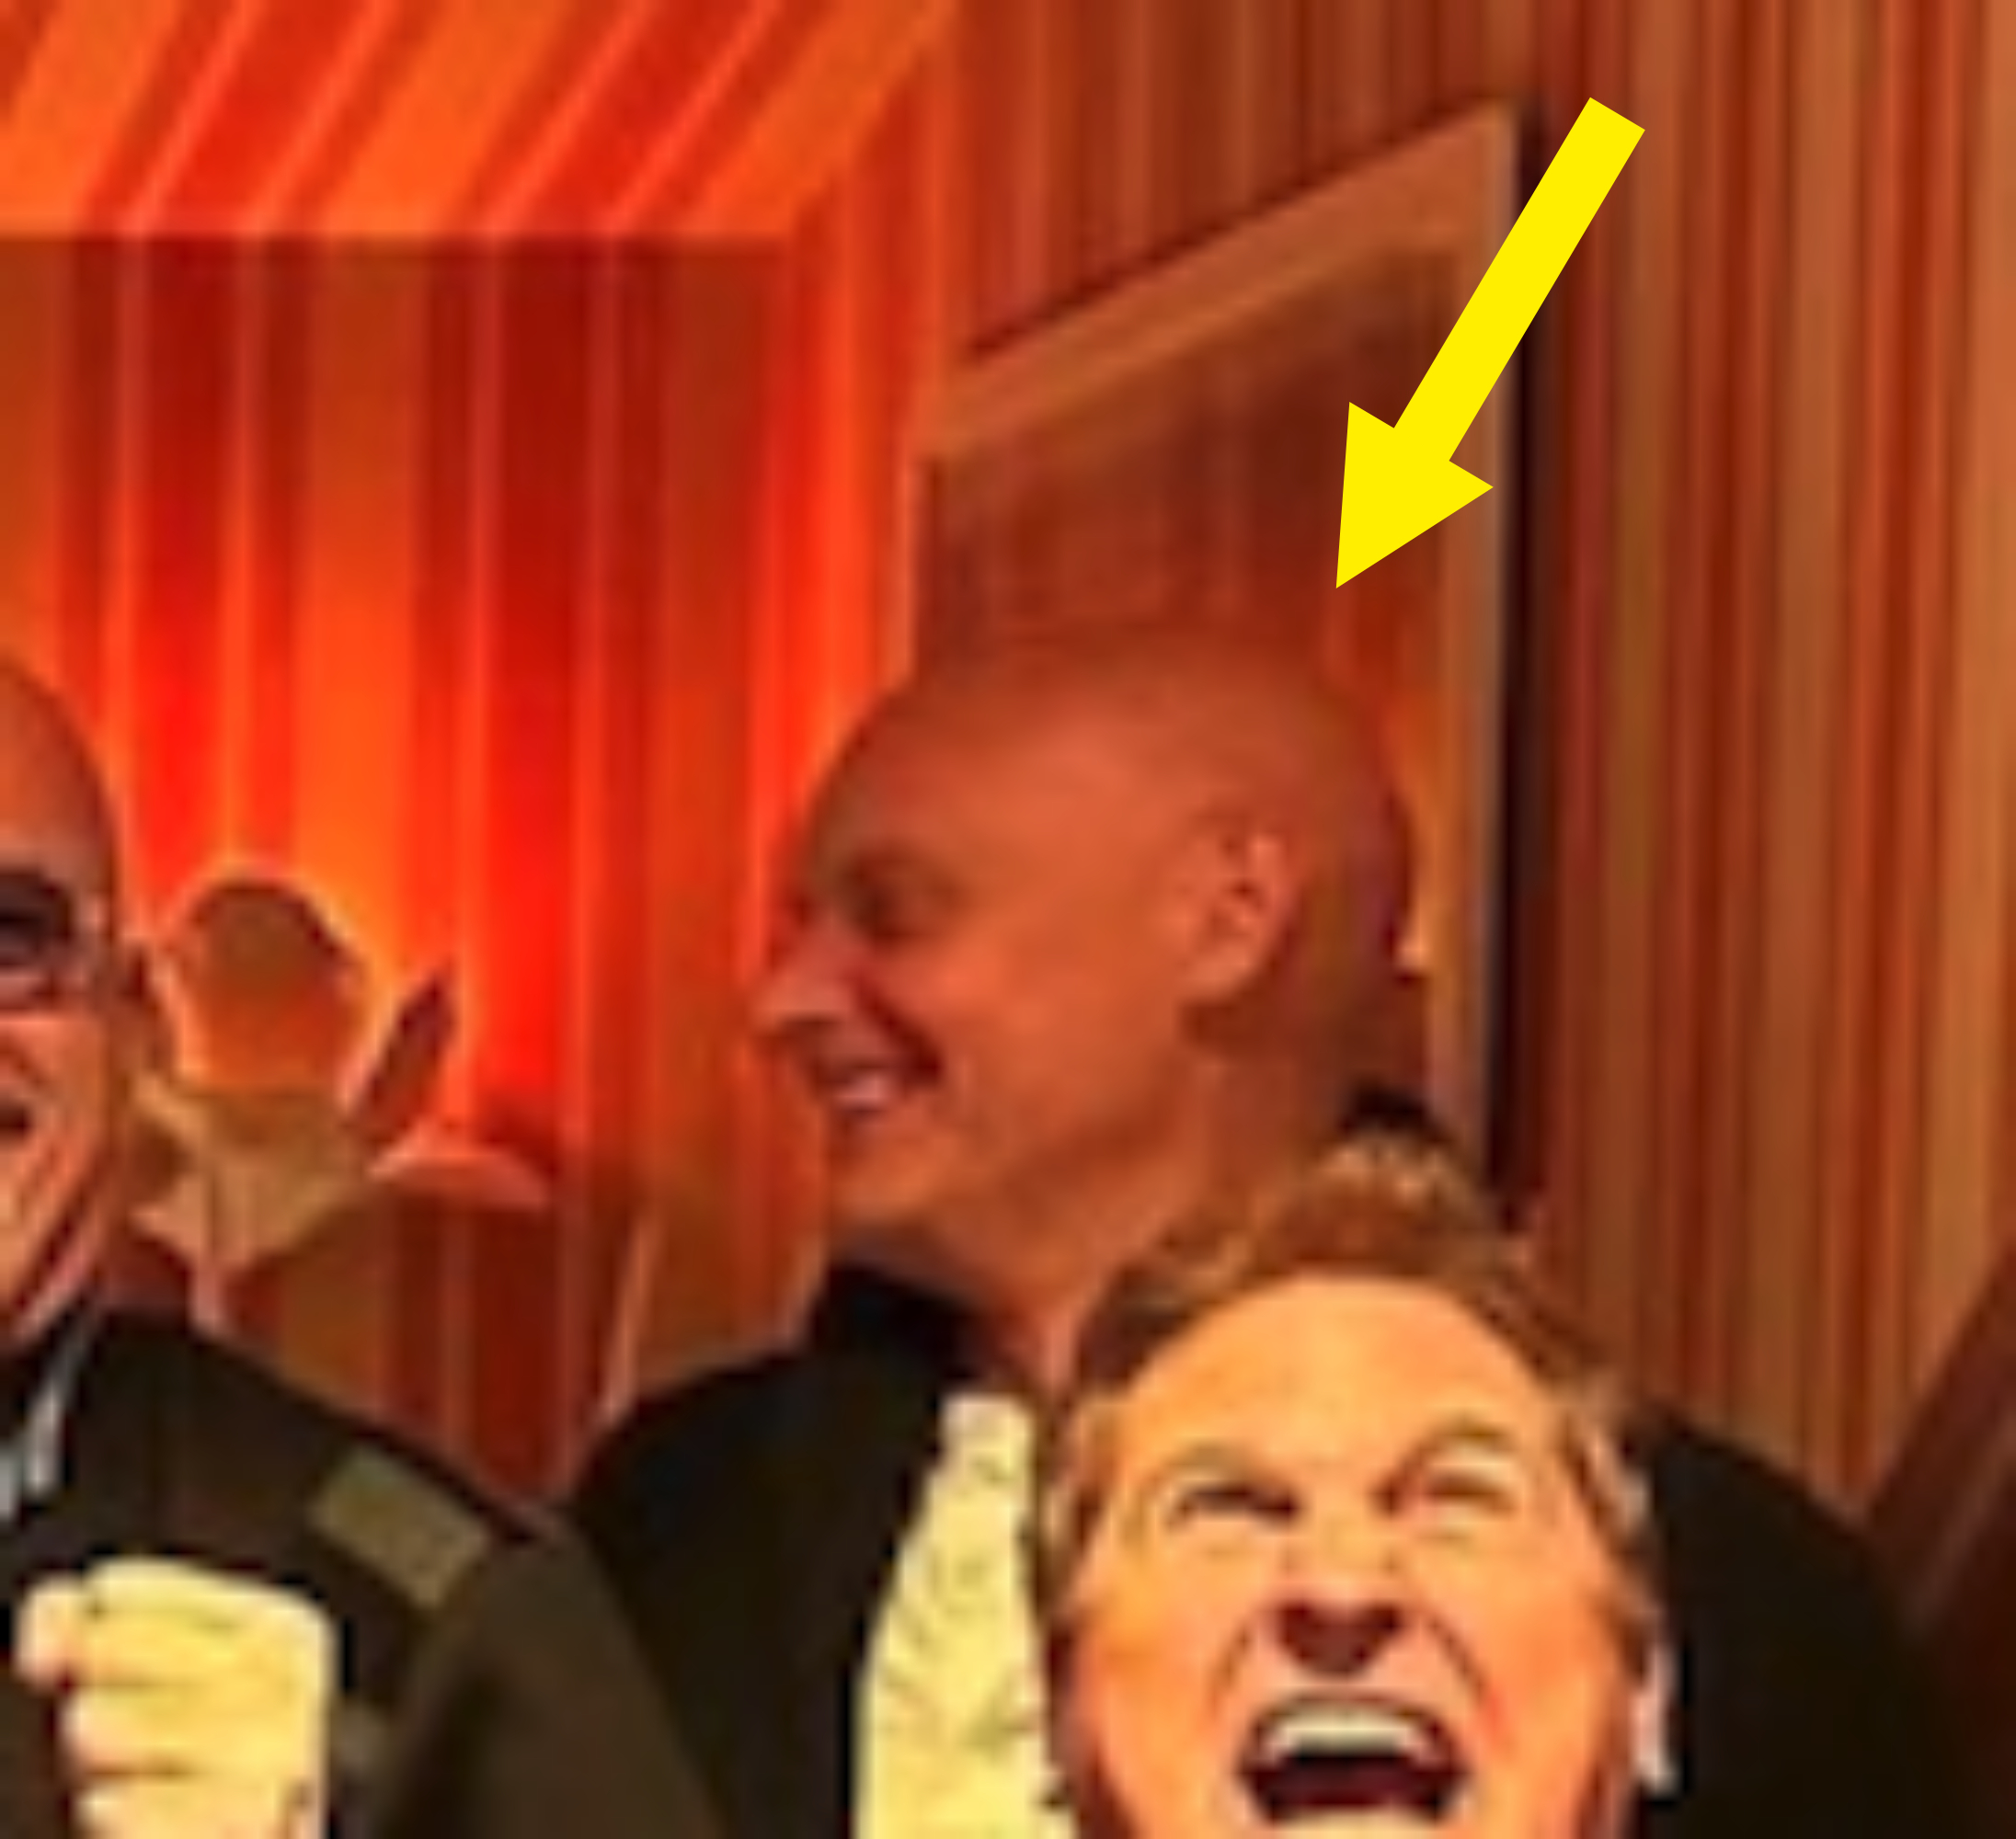 Arrow pointing to Paul smiling